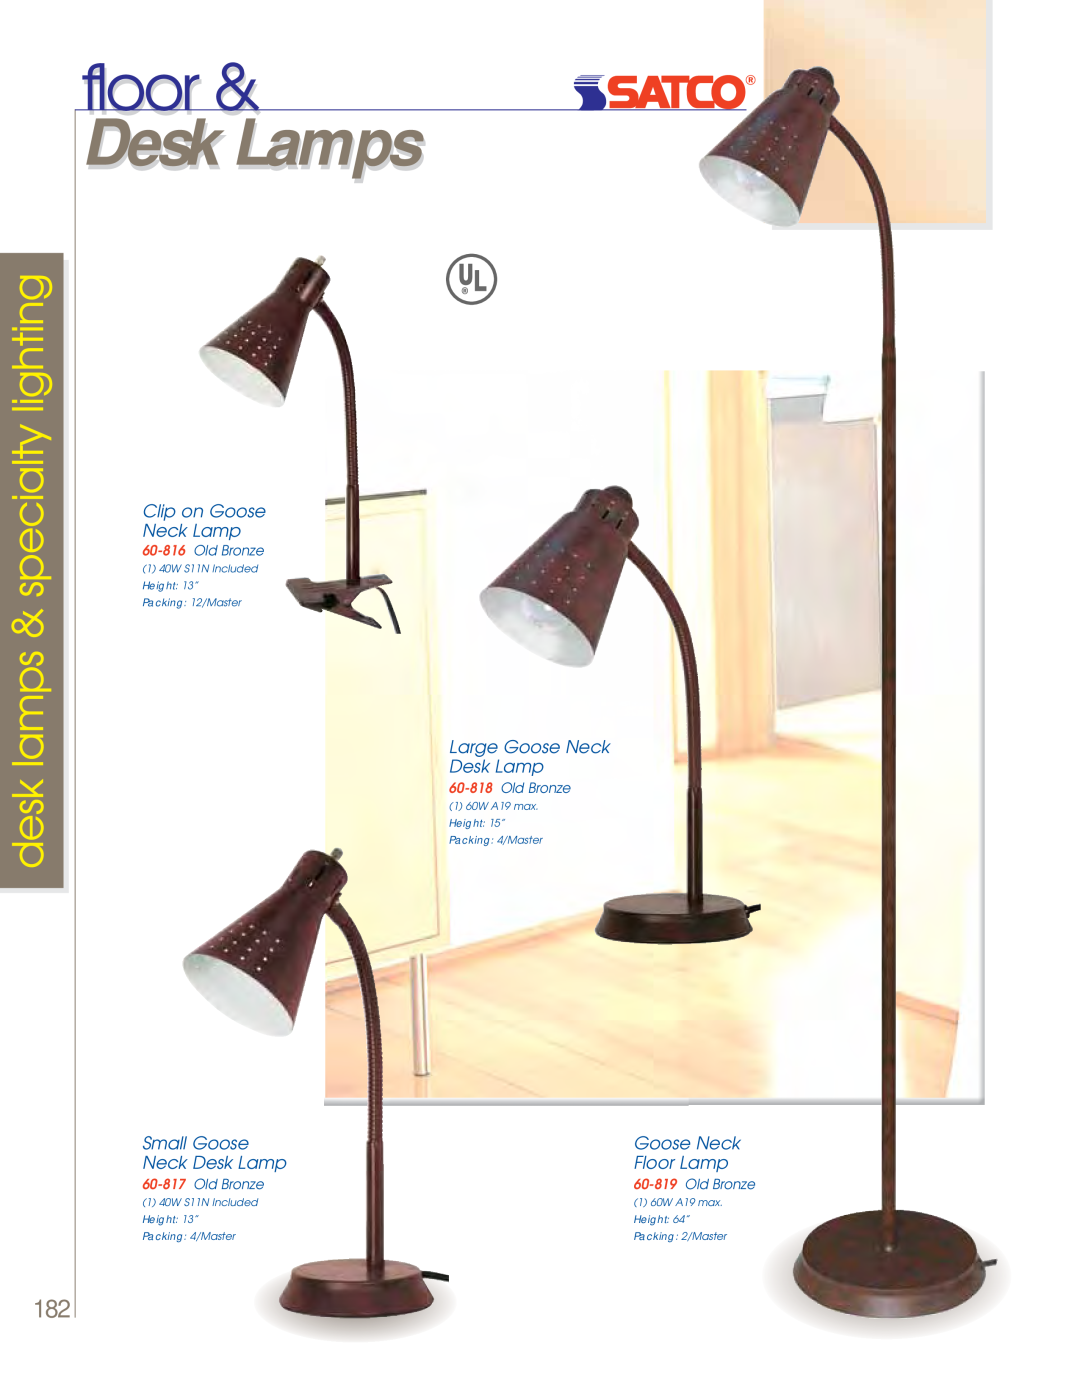 Satco Products 60-801 floor, Desk Lamps, desk lamps & specialty lighting, Clip on Goose Neck Lamp, Small Goose, Floor Lamp 